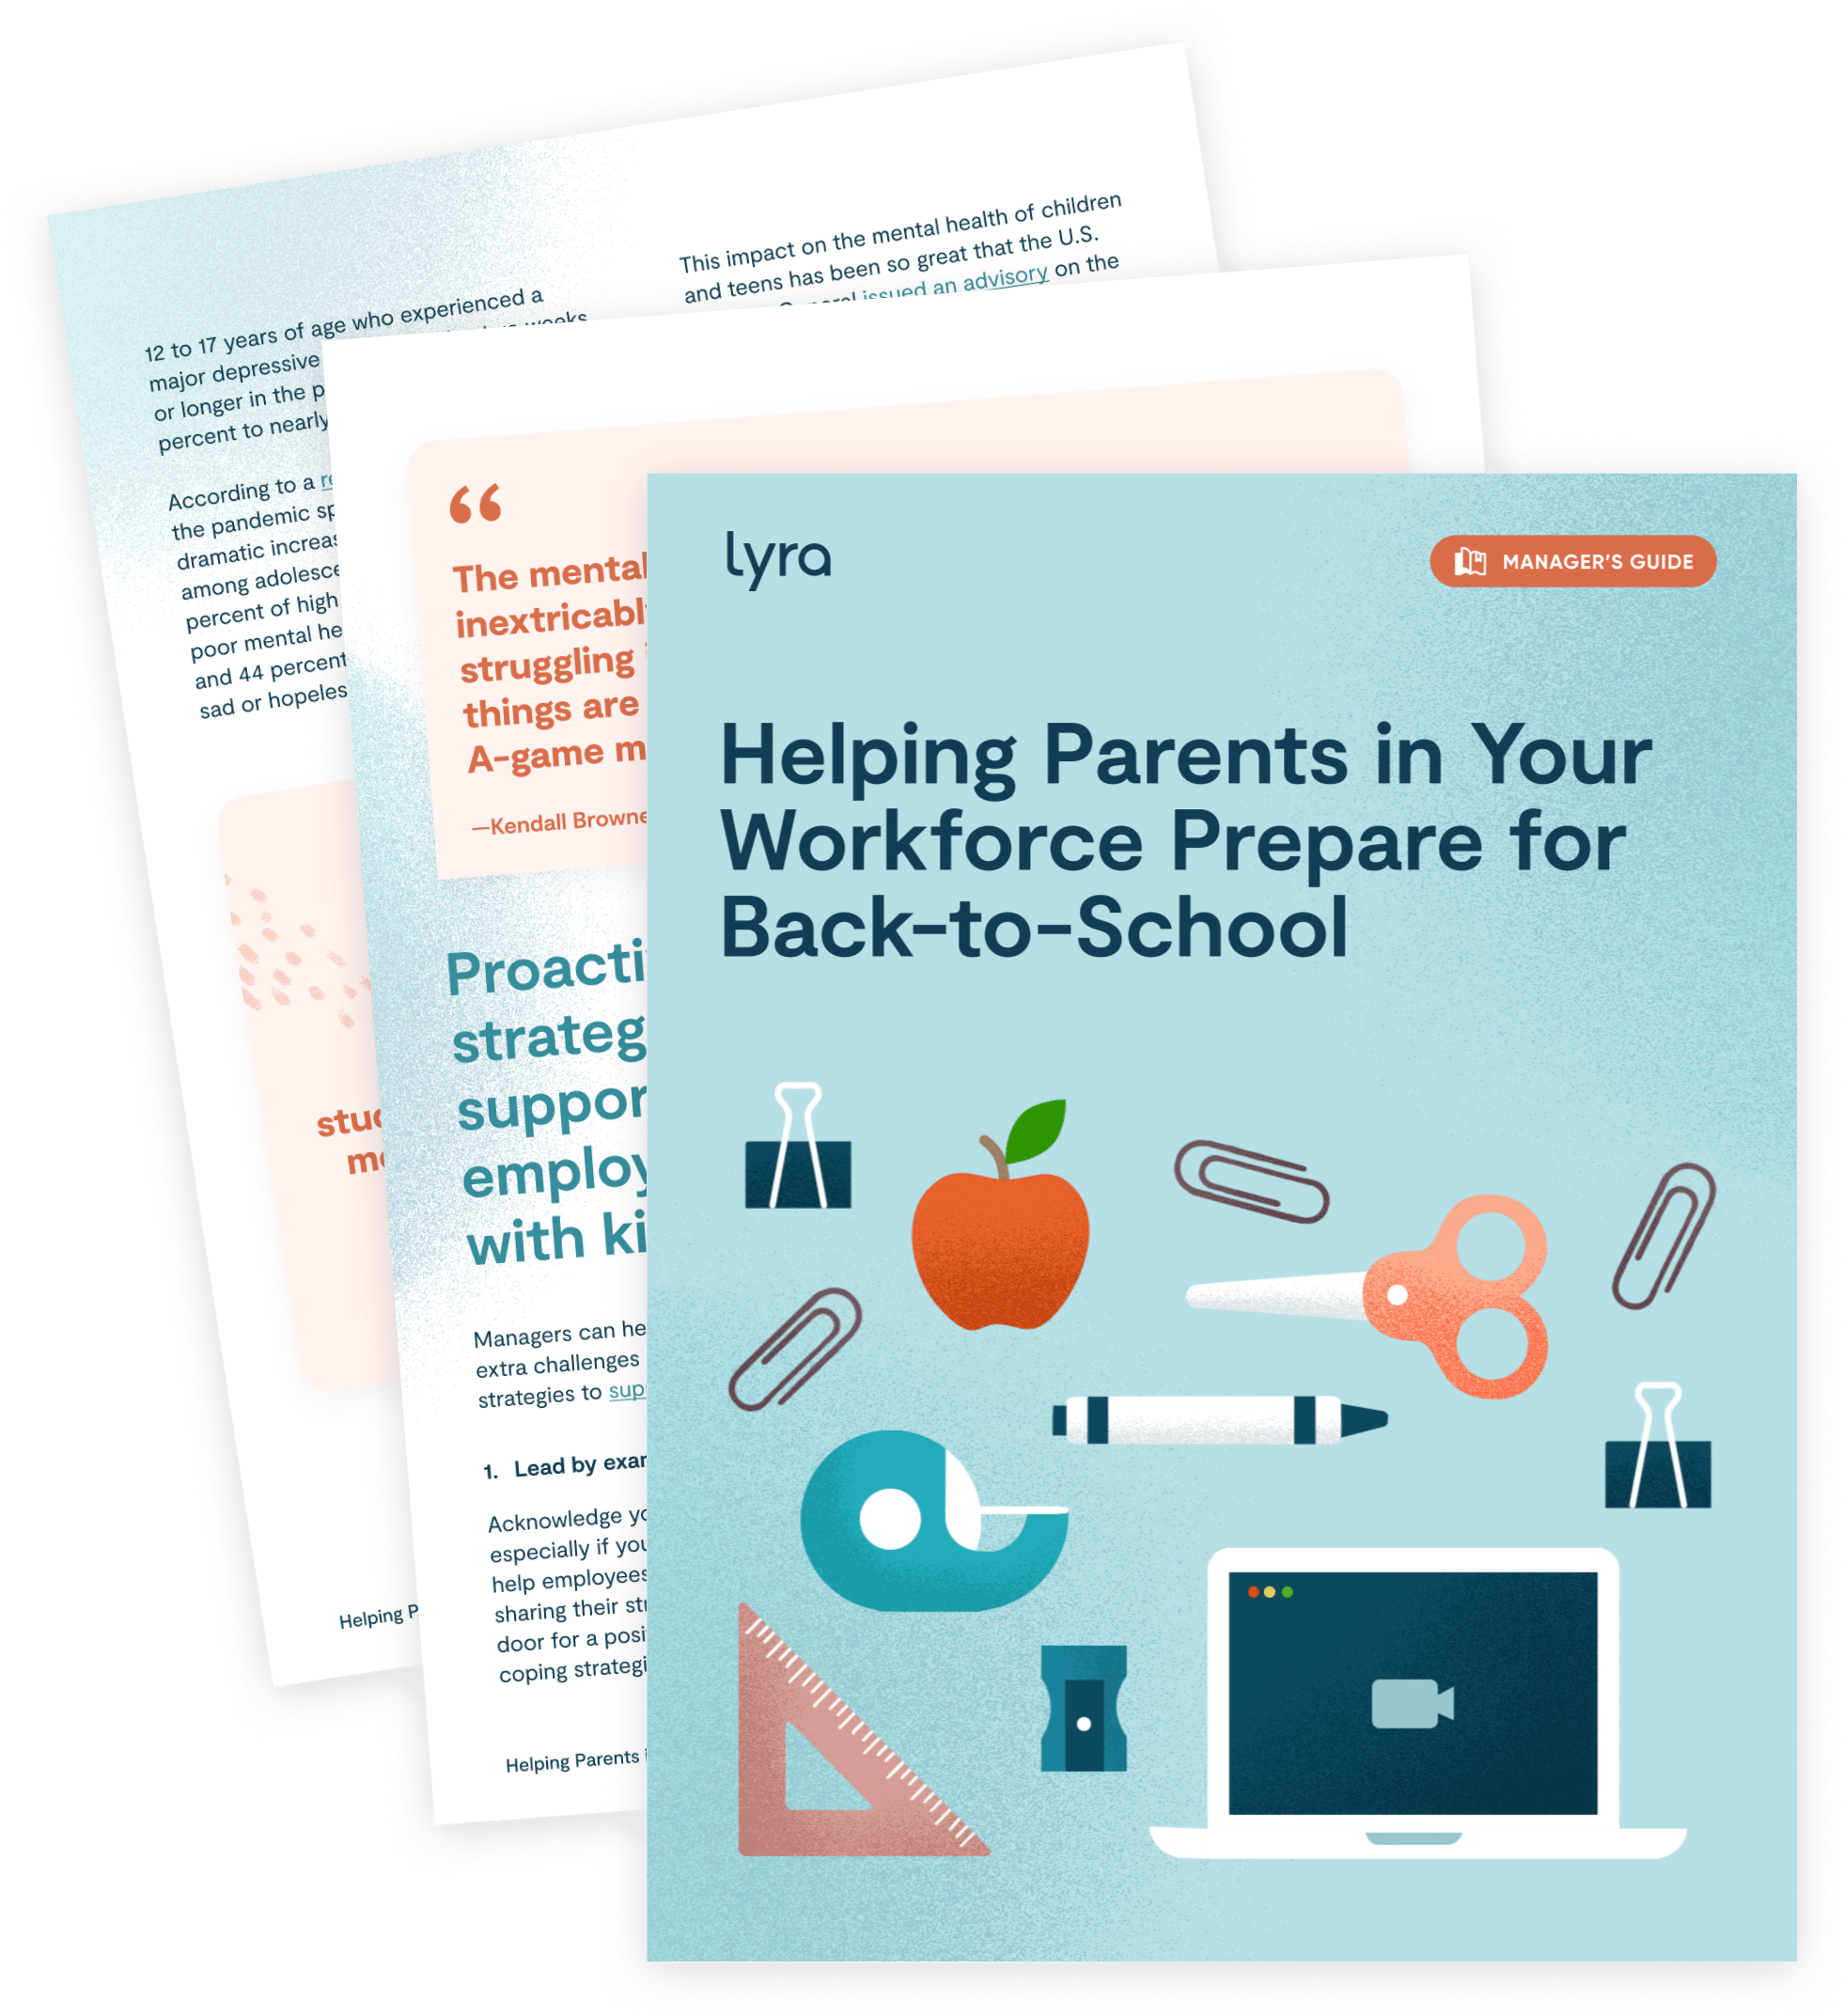 Helping parents in your workforce prepare for back-to-school thumbnail